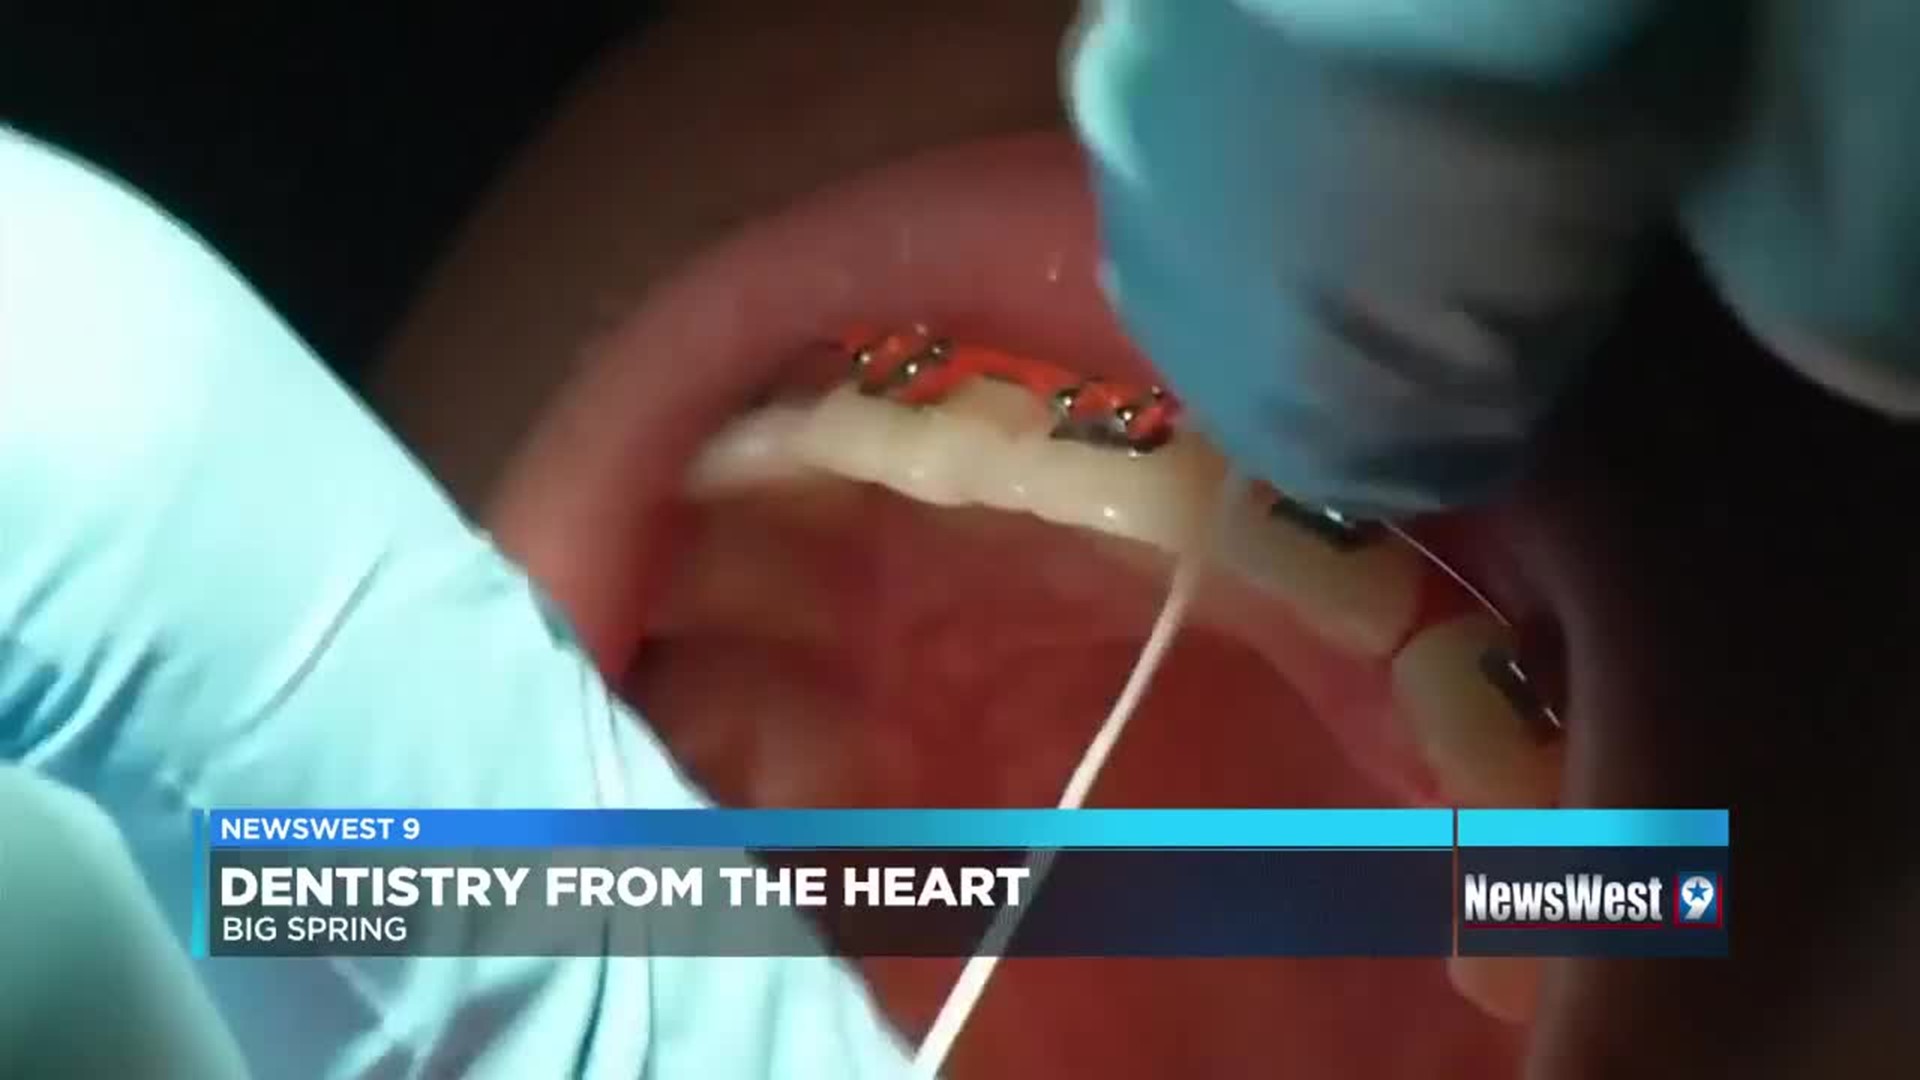 Ward Family Dental holding ‘Dentistry from the Heart’ event